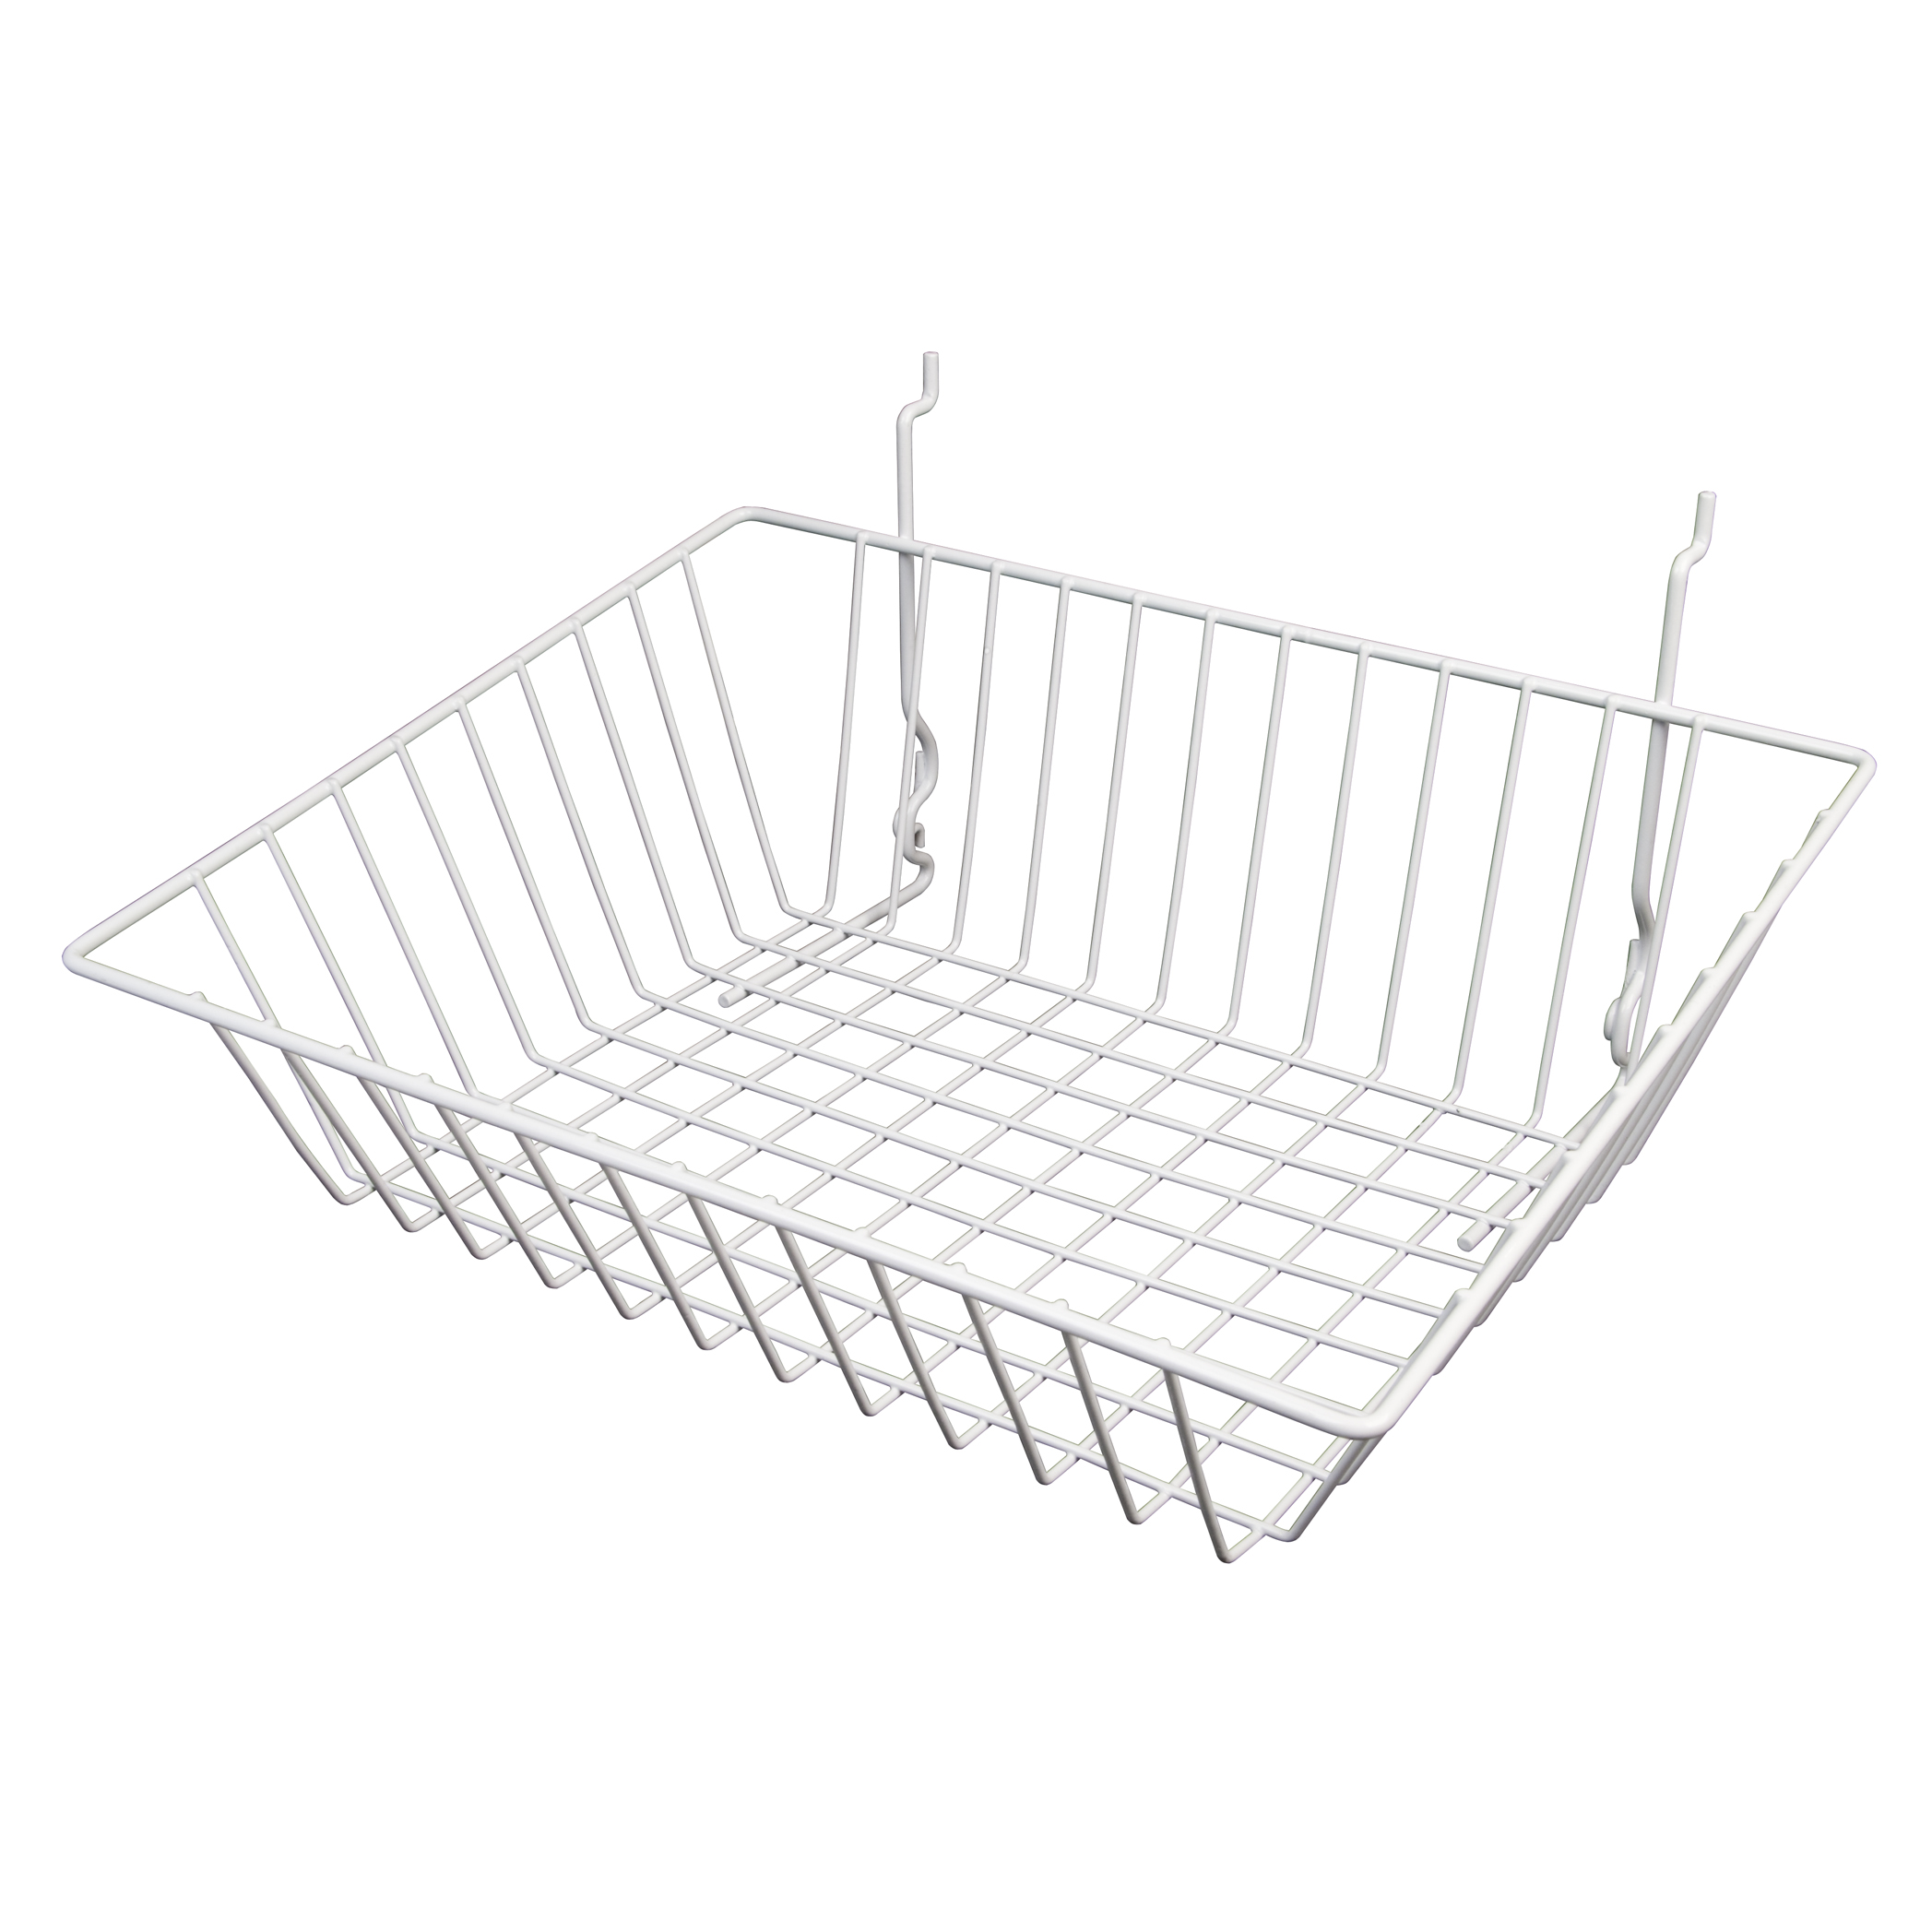 White Multi-Fit Sloped Front Wire Basket for Slatwall 2 Pack Set of 6 Econoco Pegboard or Gridwall White Metal Semi-Gloss Basket